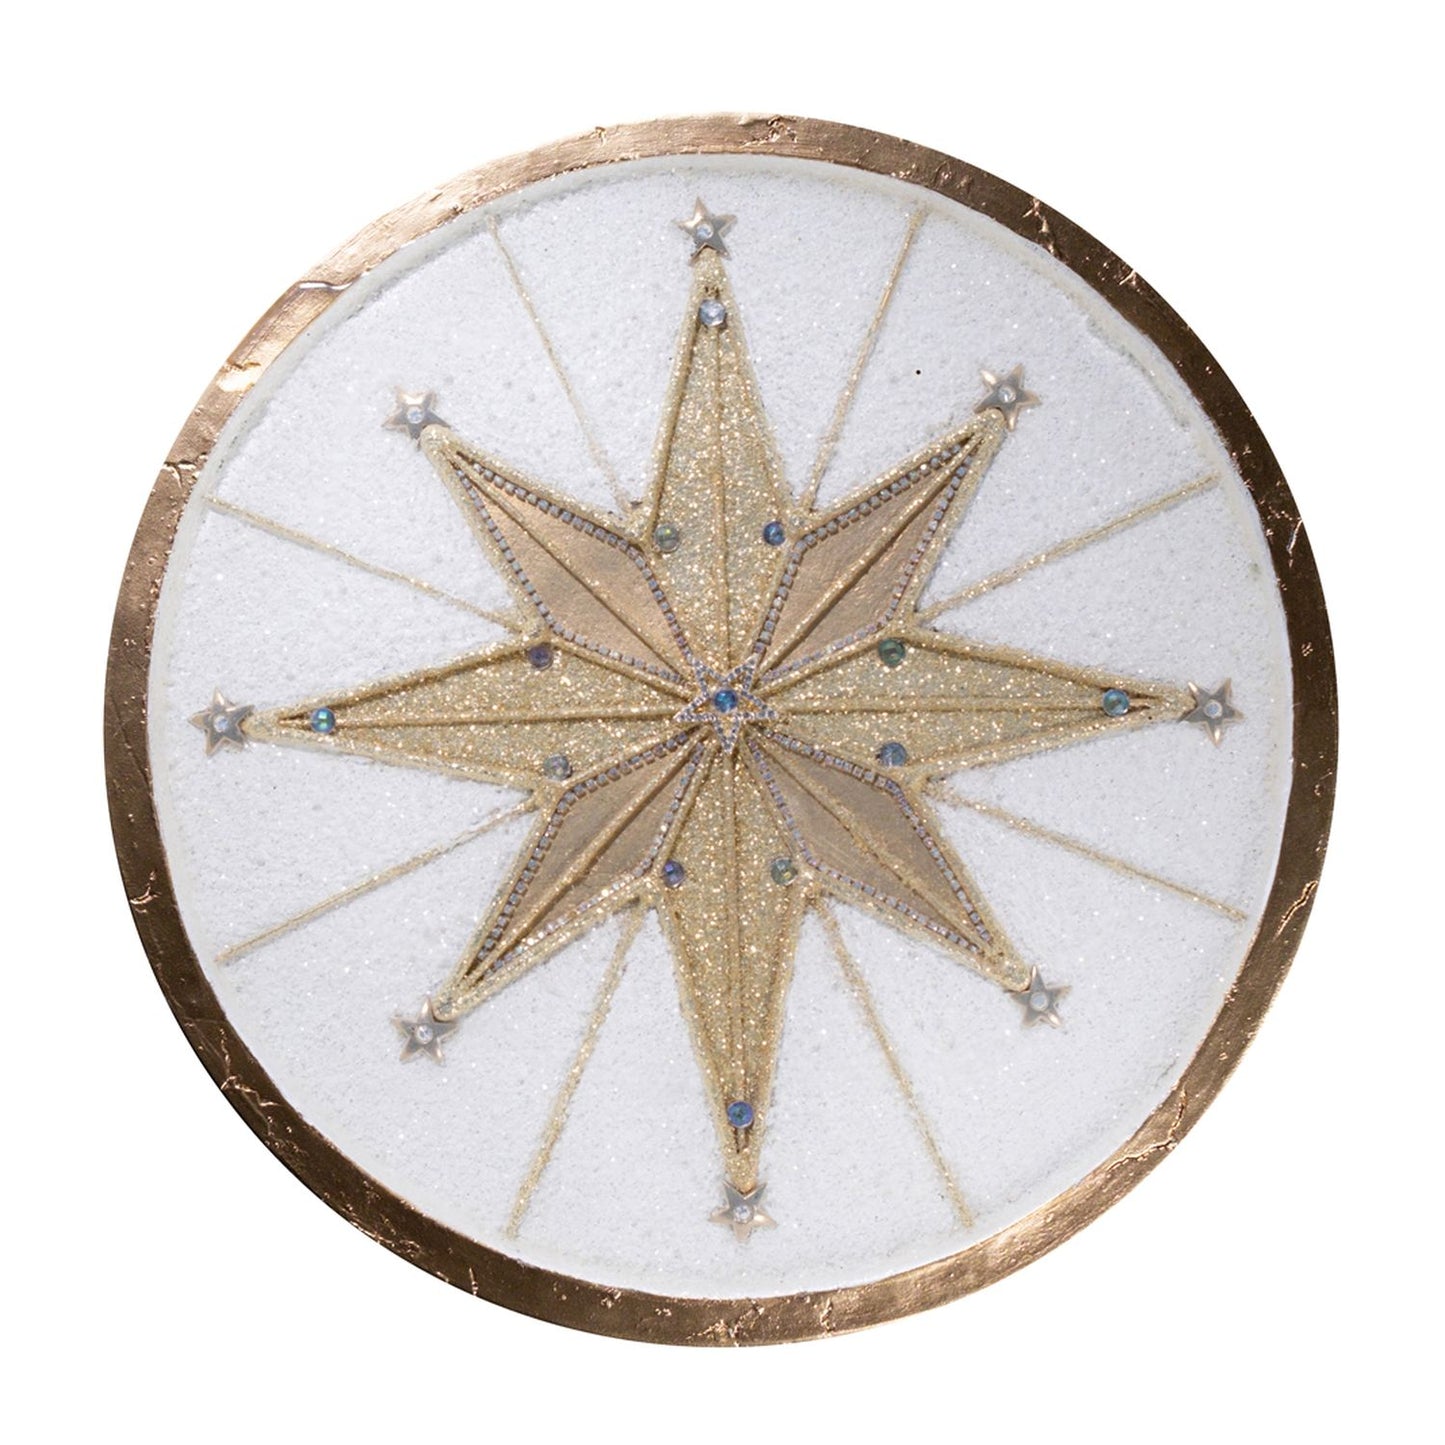 Katherine's Collection 2023 Bethlehem Star Cake Stand, 11x10 Inches, Gold/White Resin